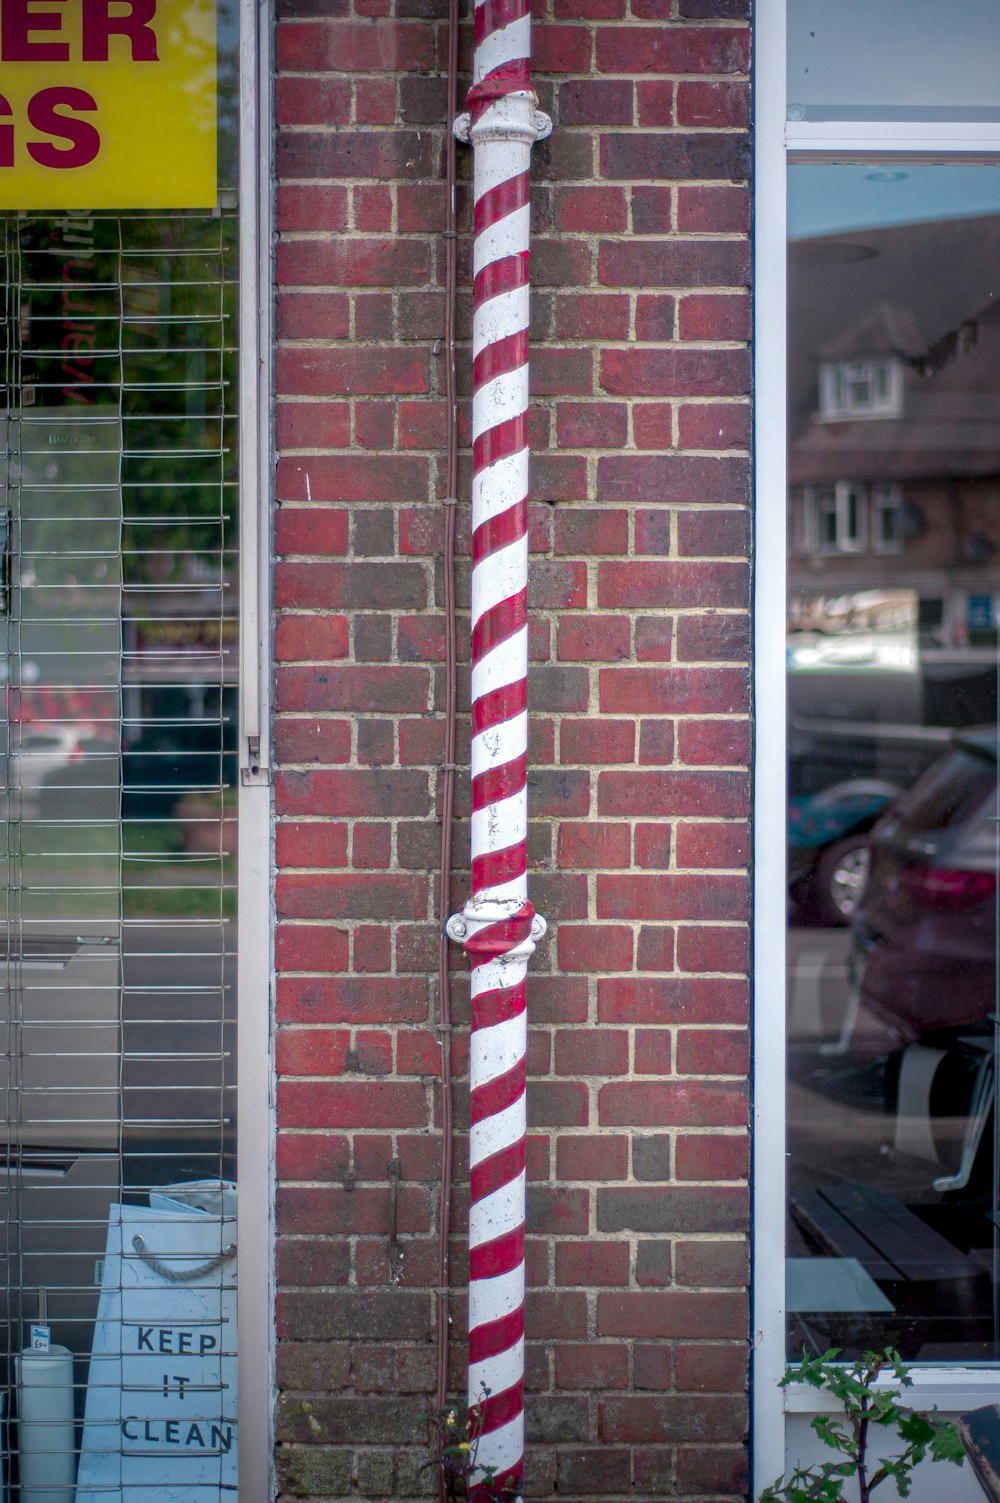 red and white striped flag